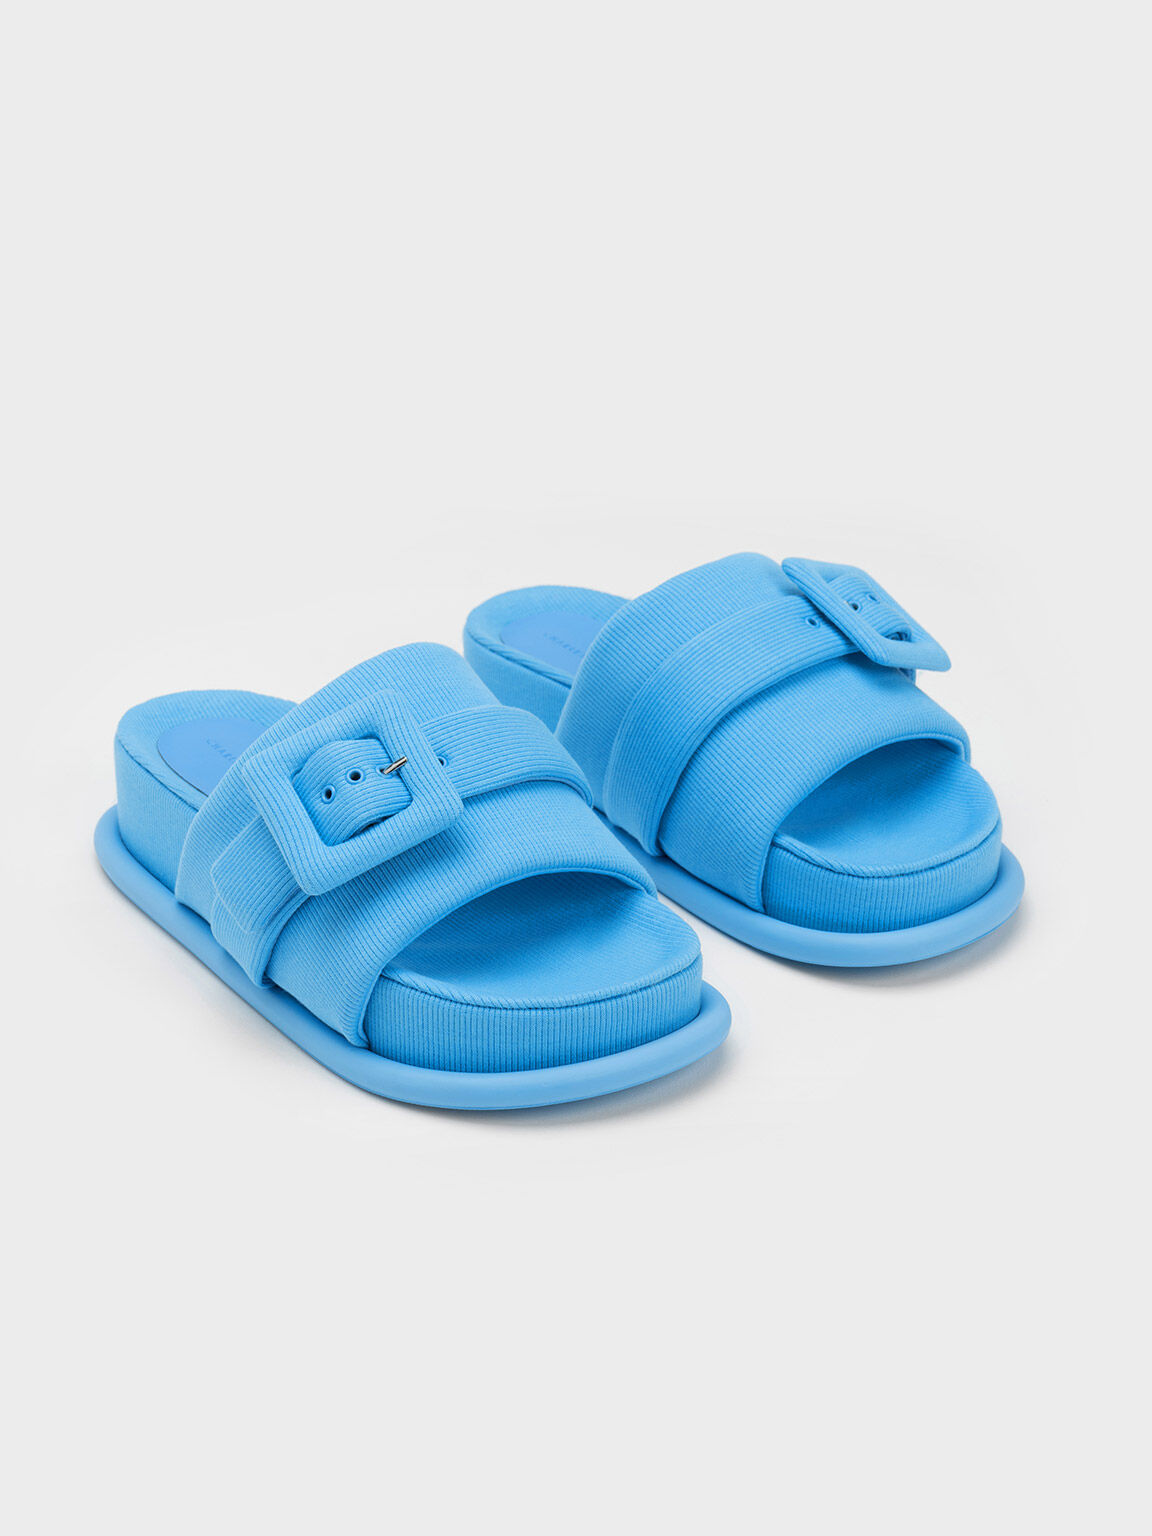 Blue Woven Buckled Slide Sandals - CHARLES & KEITH BH